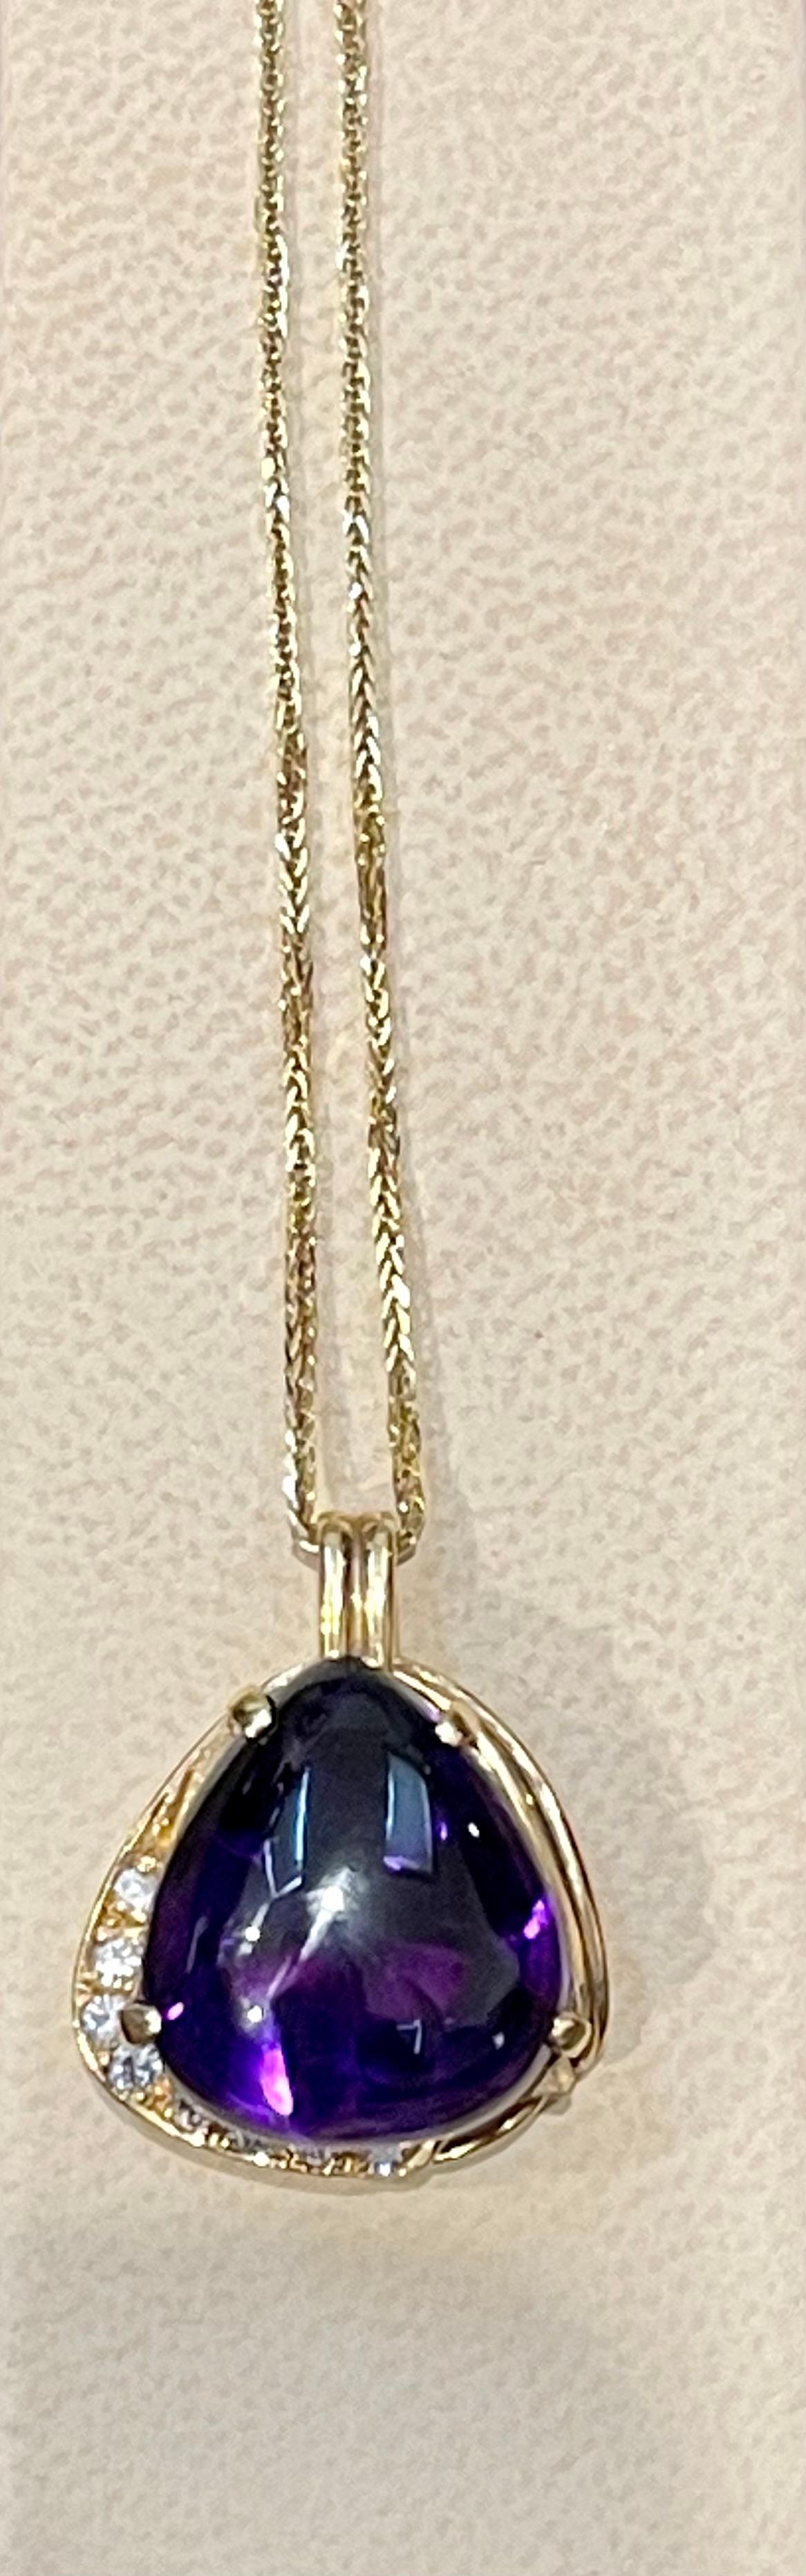 10 Carat Tear Drop Amethyst and Diamonds Pendent Necklace 18 Karat Yellow Gold For Sale 15